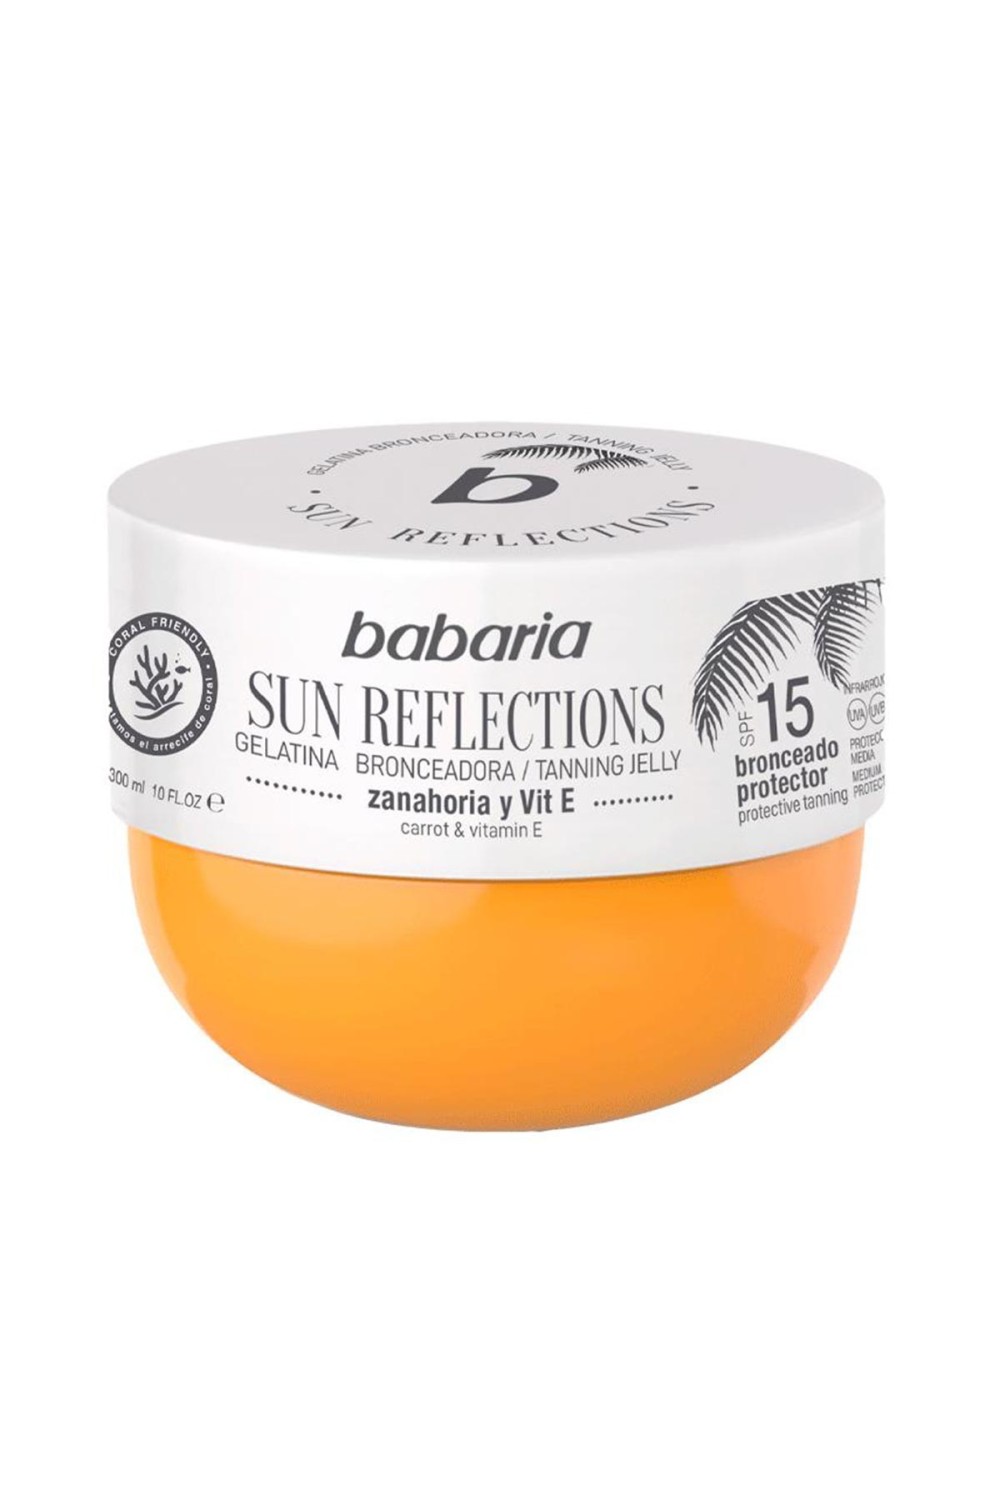 Babaria Sun Reflections Tanning Jelly Protective Tanning Spf15  300ml